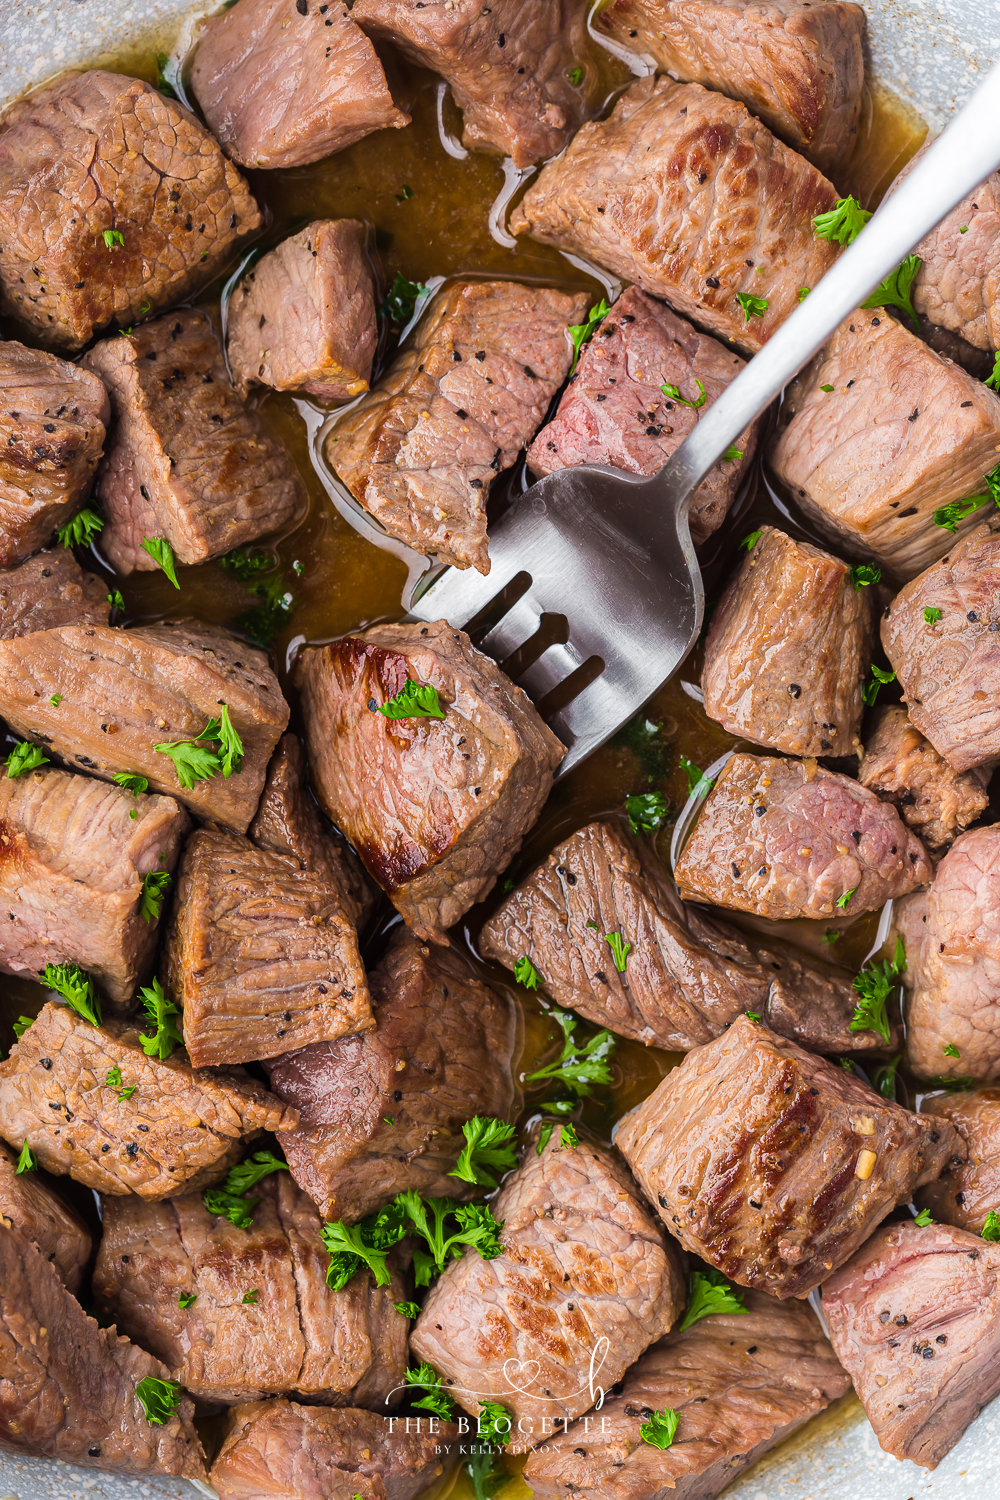 Garlic Butter Steak Bites are steak cubes cooked in a mouthwatering garlic butter sauce. Each juicy and tender bite leaves you wanting more! 